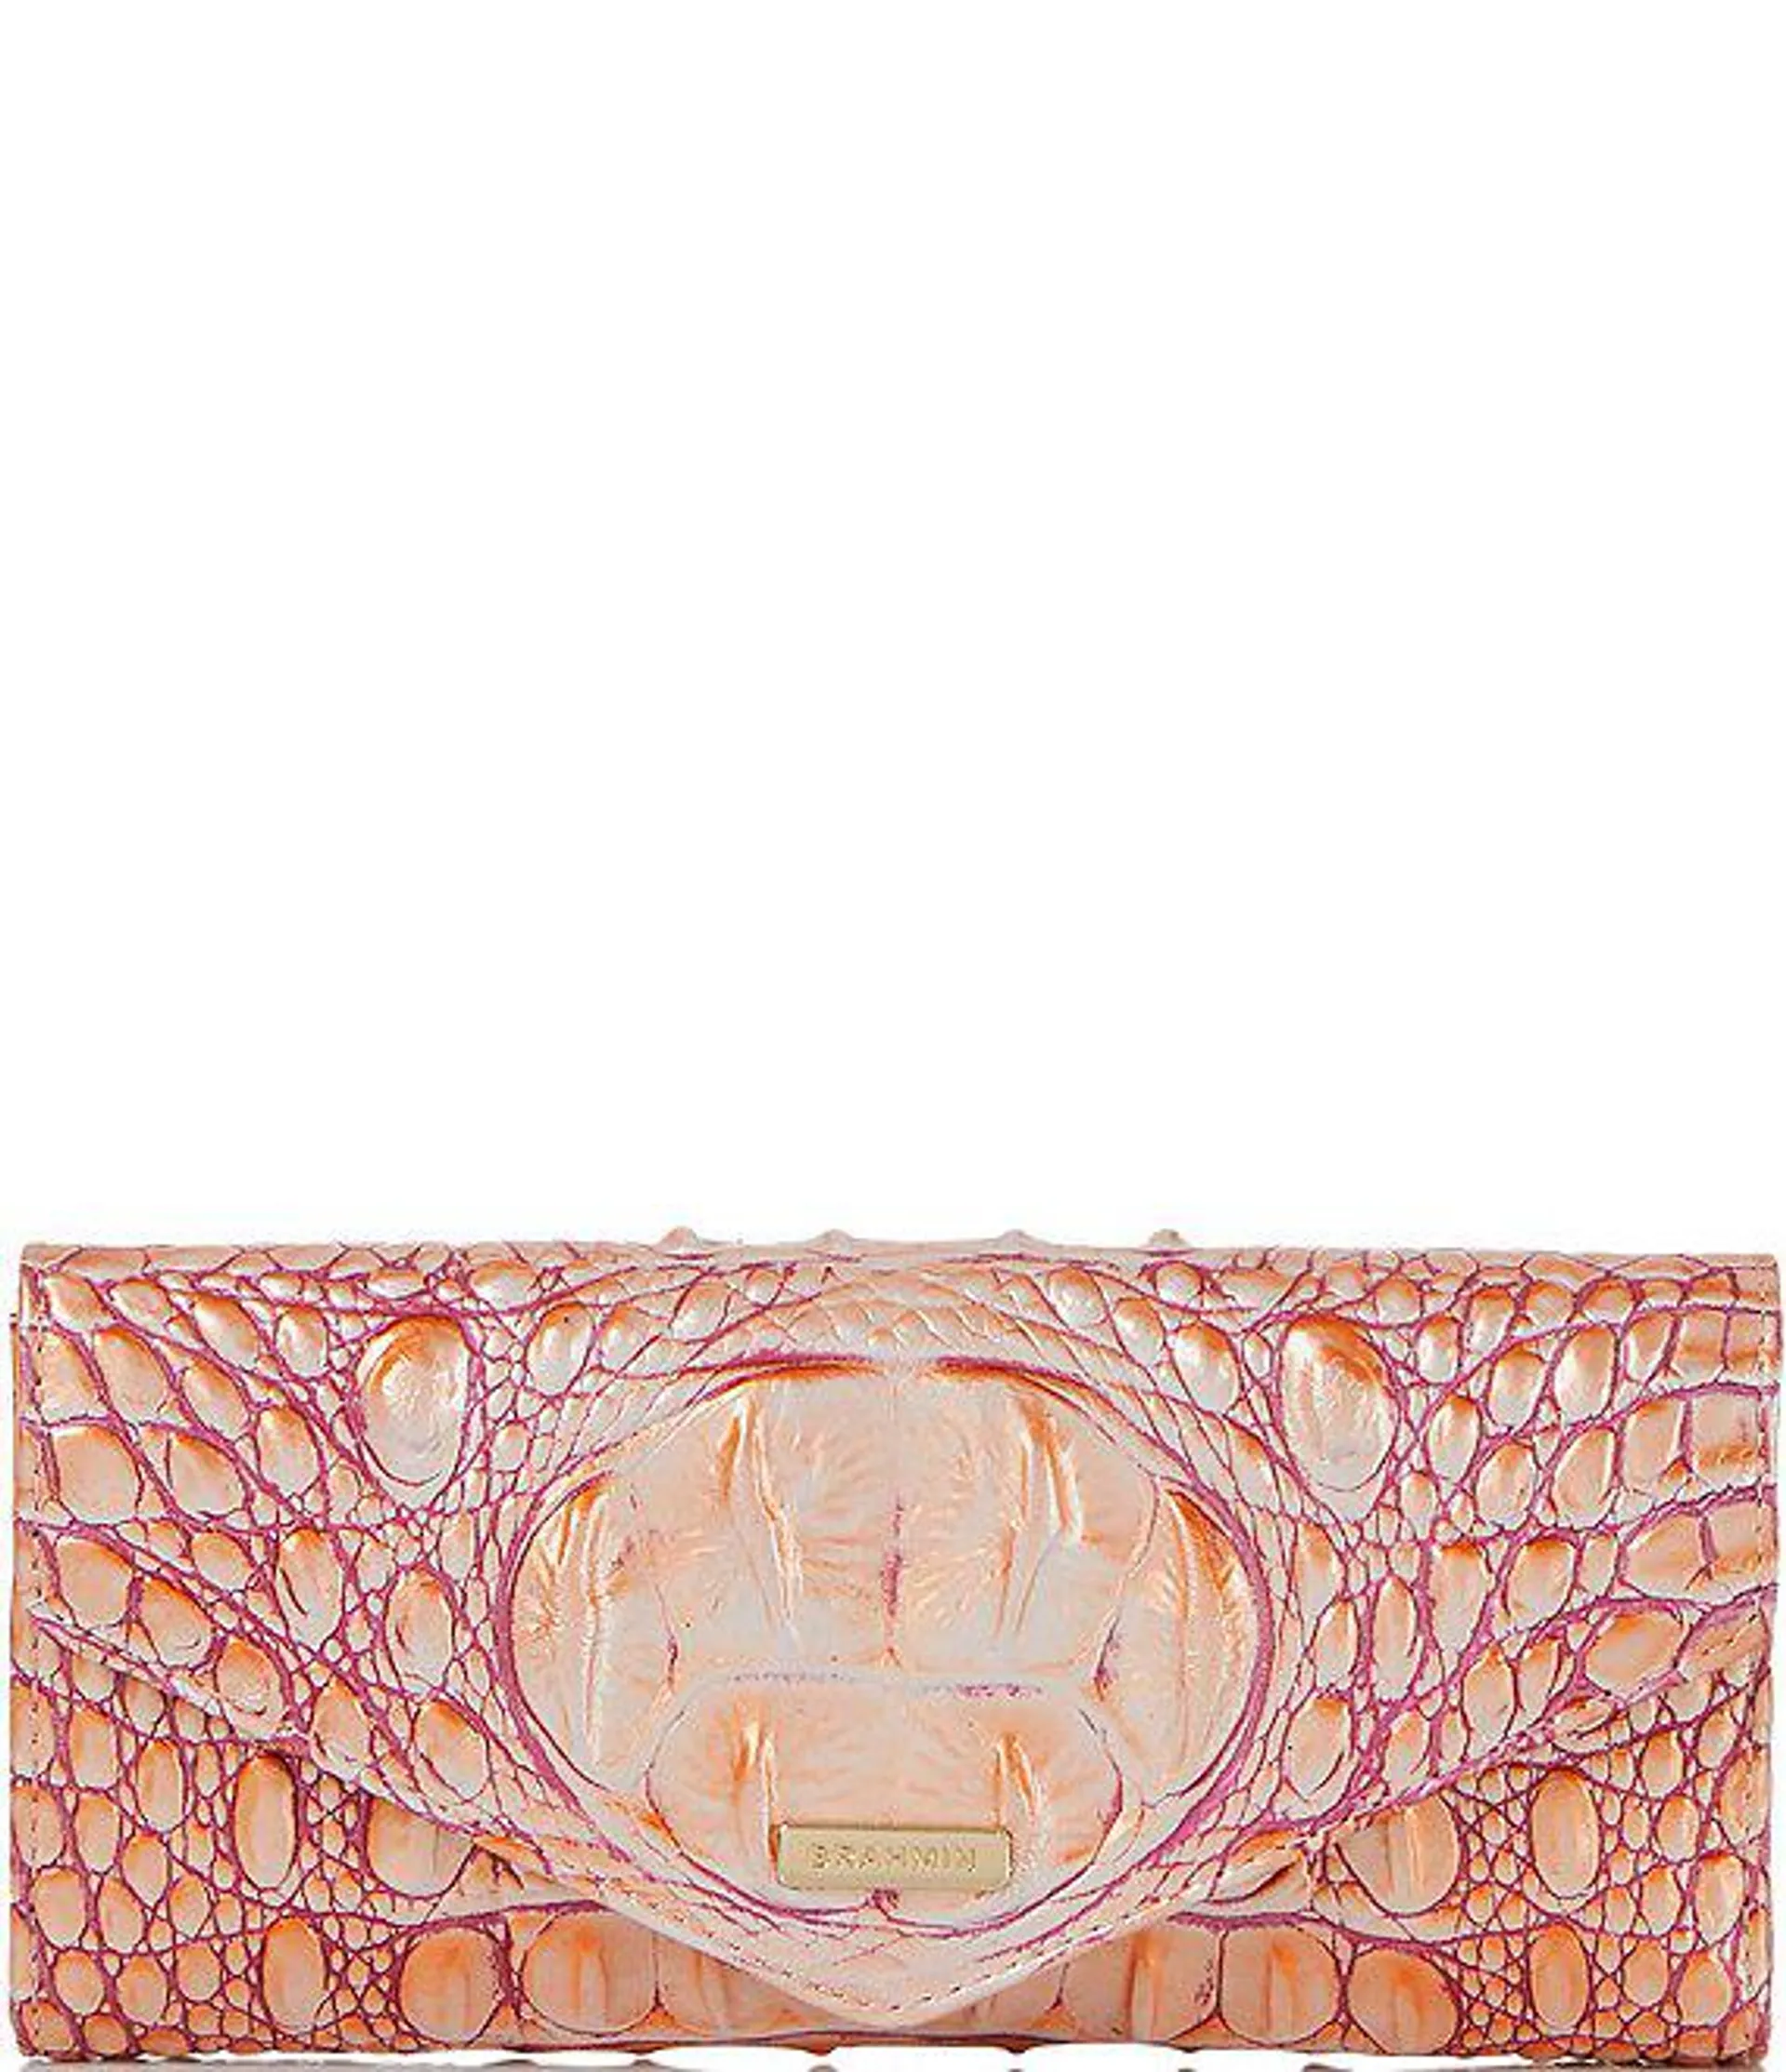 Melbourne Collection Apricot Rose Veronica Wallet